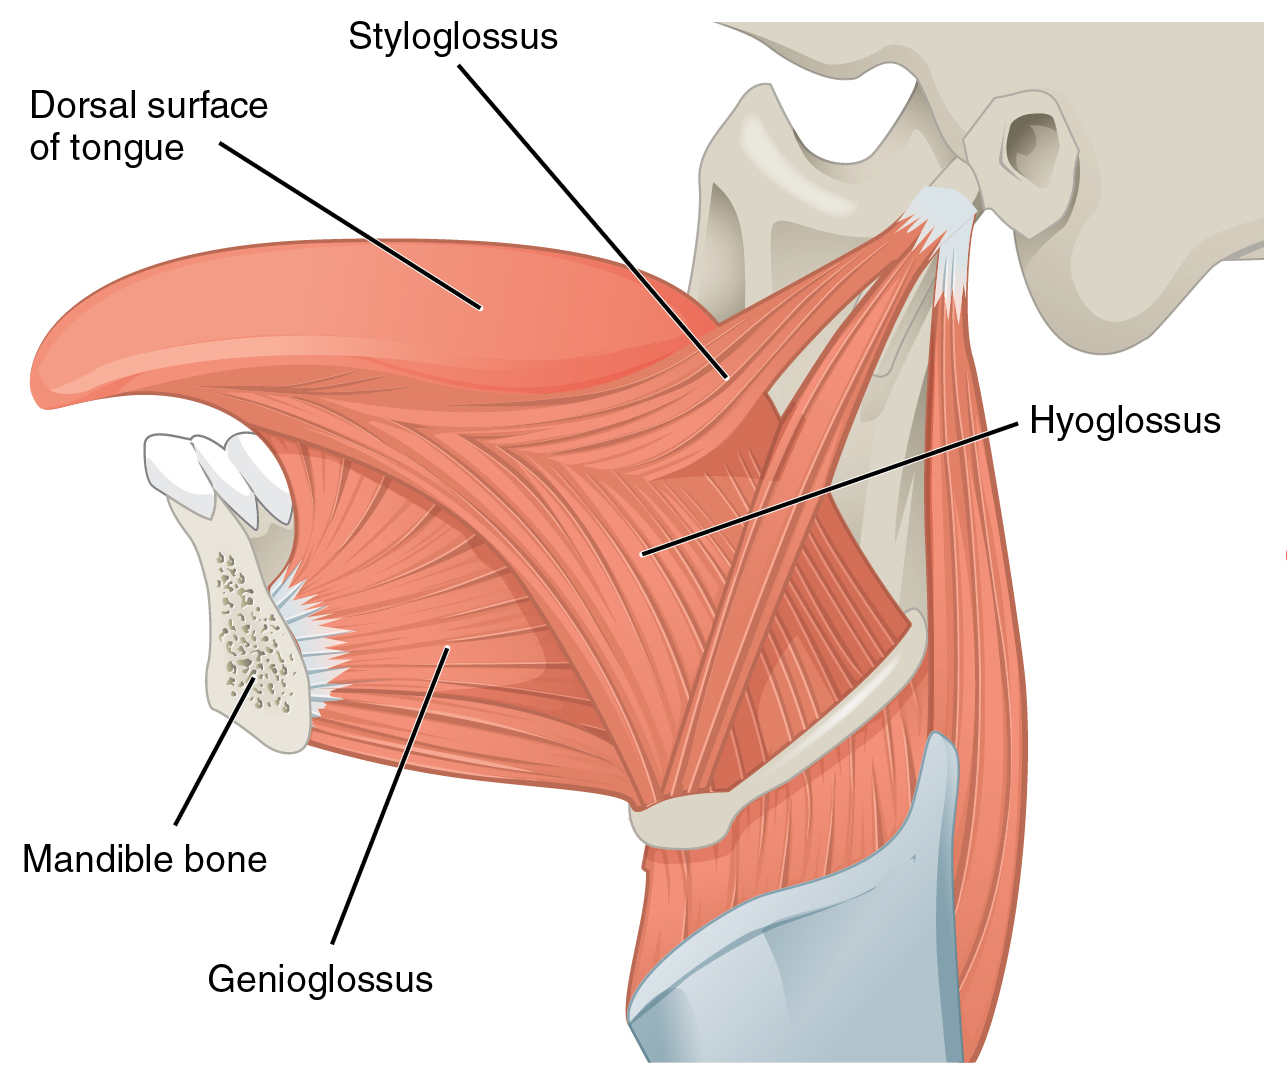 Albums 94+ Images what do the geniohyoid, hyoglossus, and stylohyoid muscles have in common? Latest